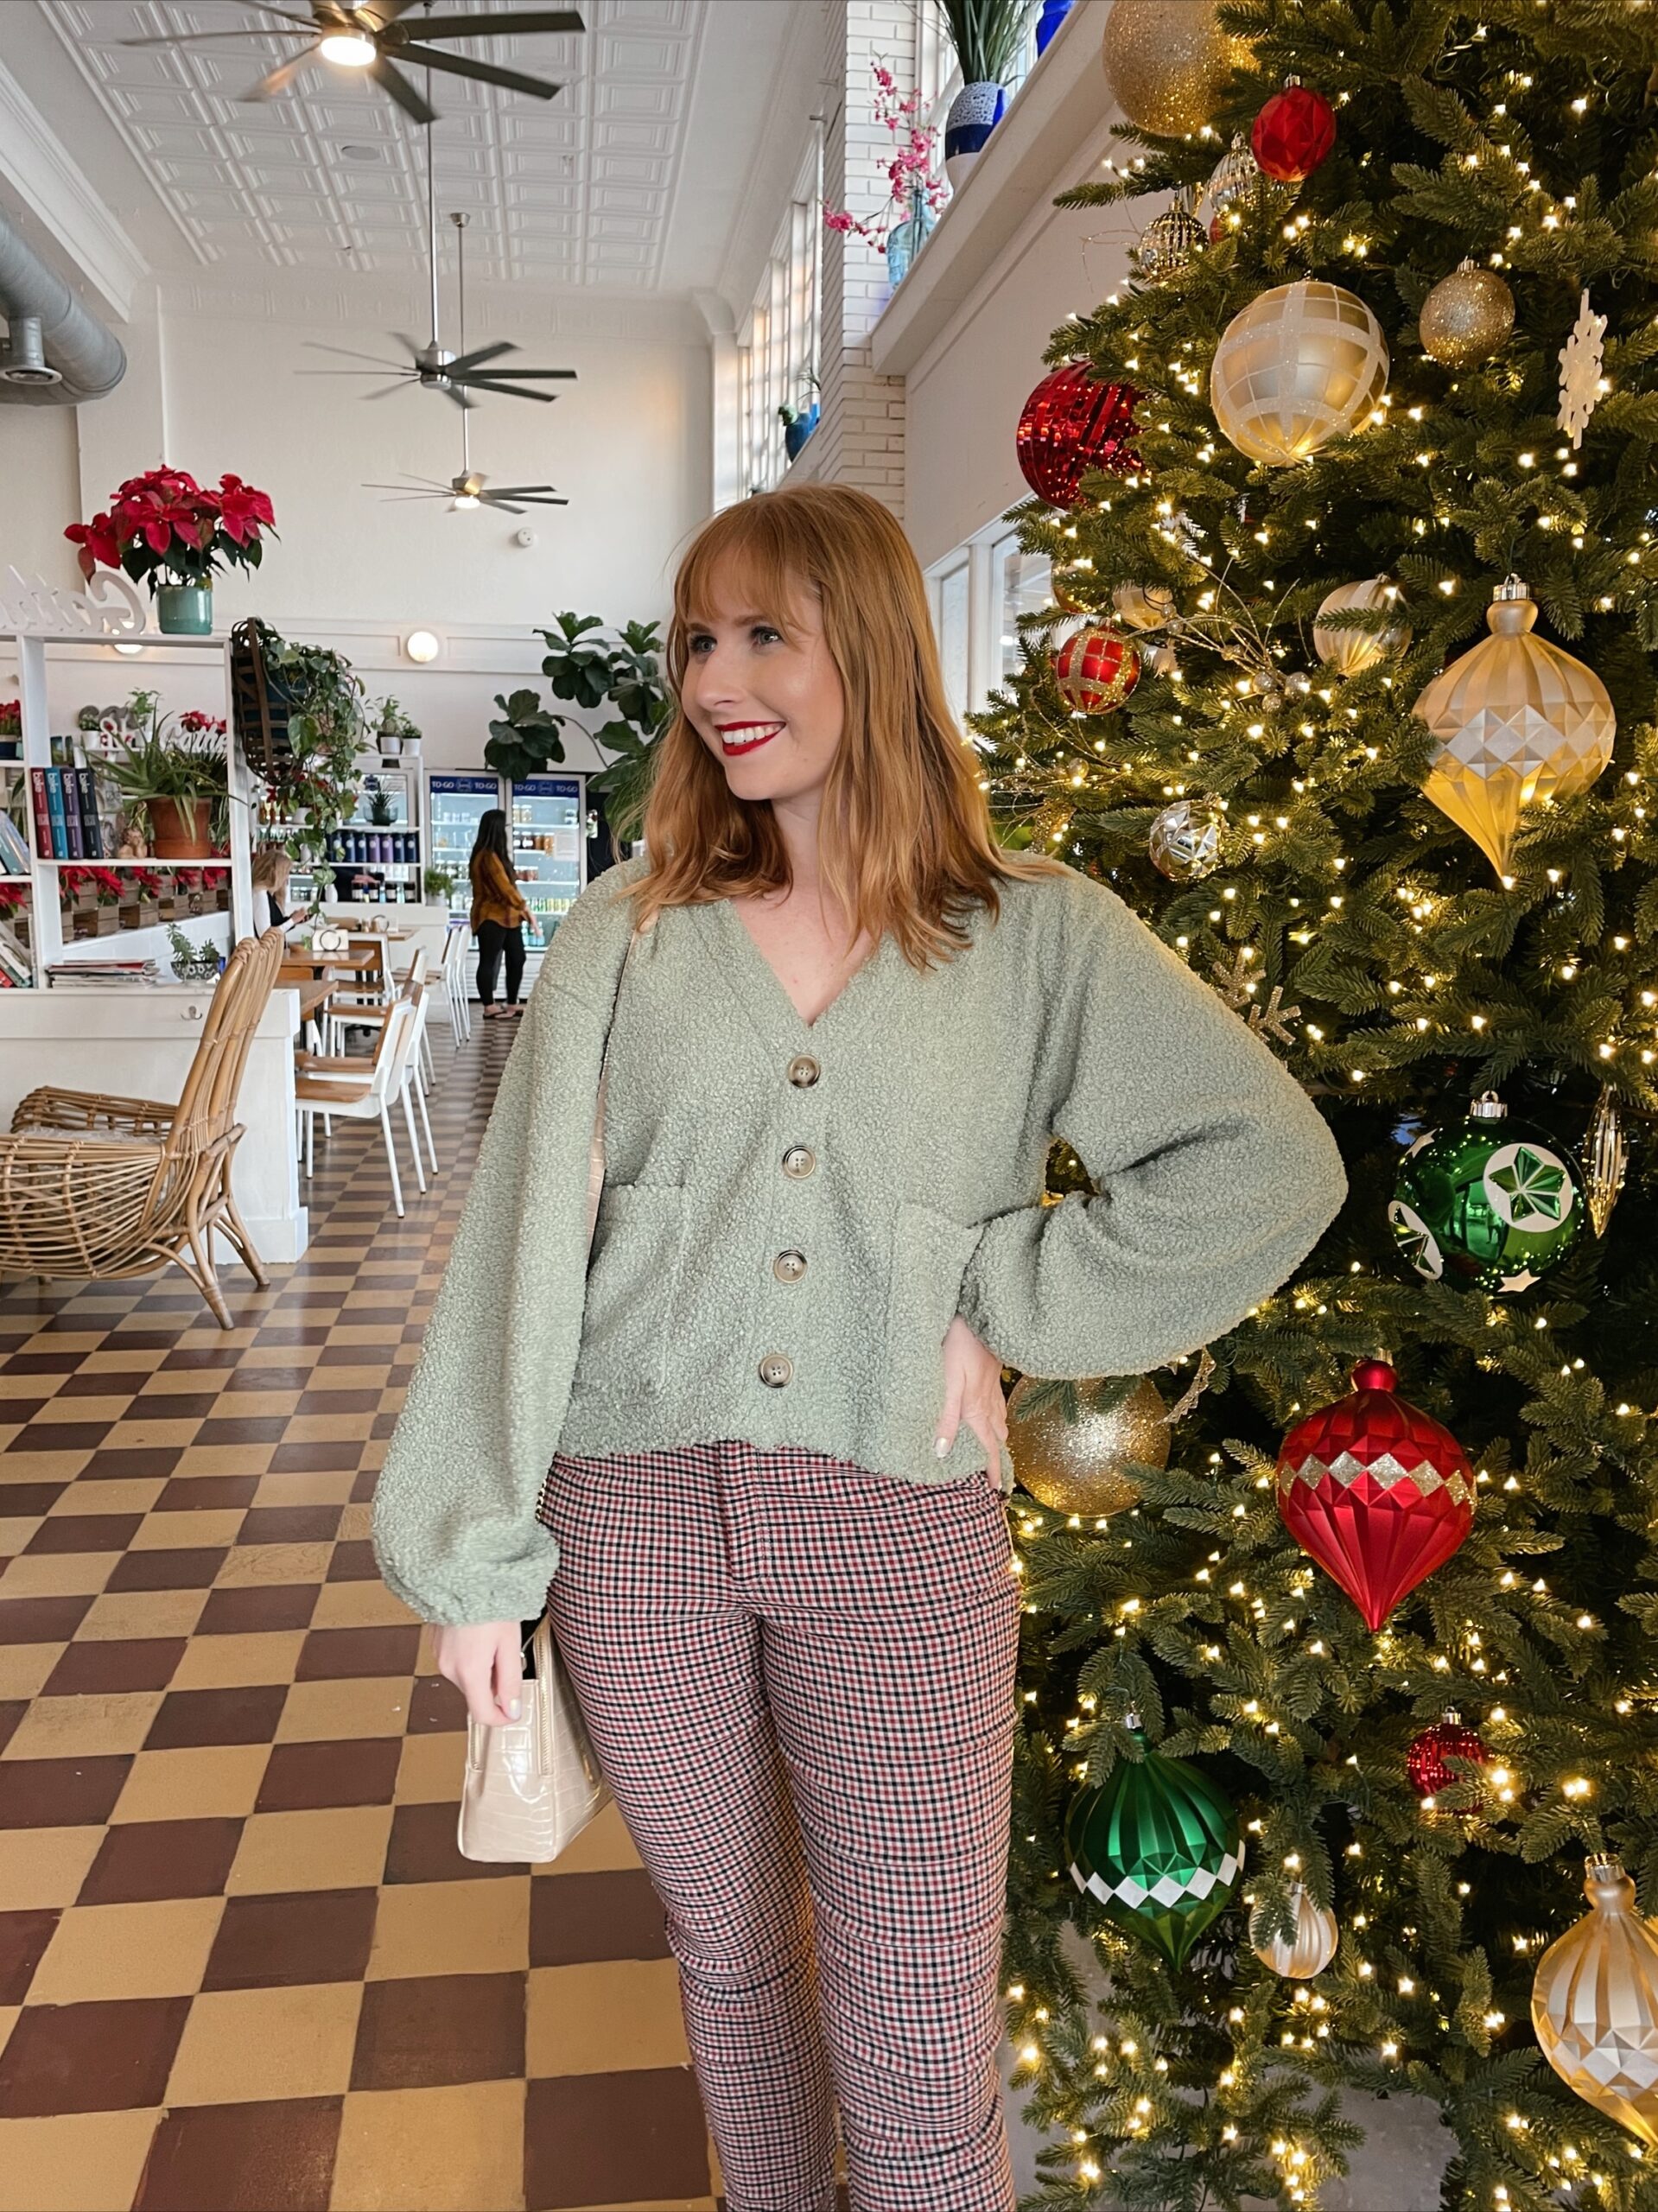 6 Easy Holiday Fashion Trends to Try This Season | Affordable by Amanda